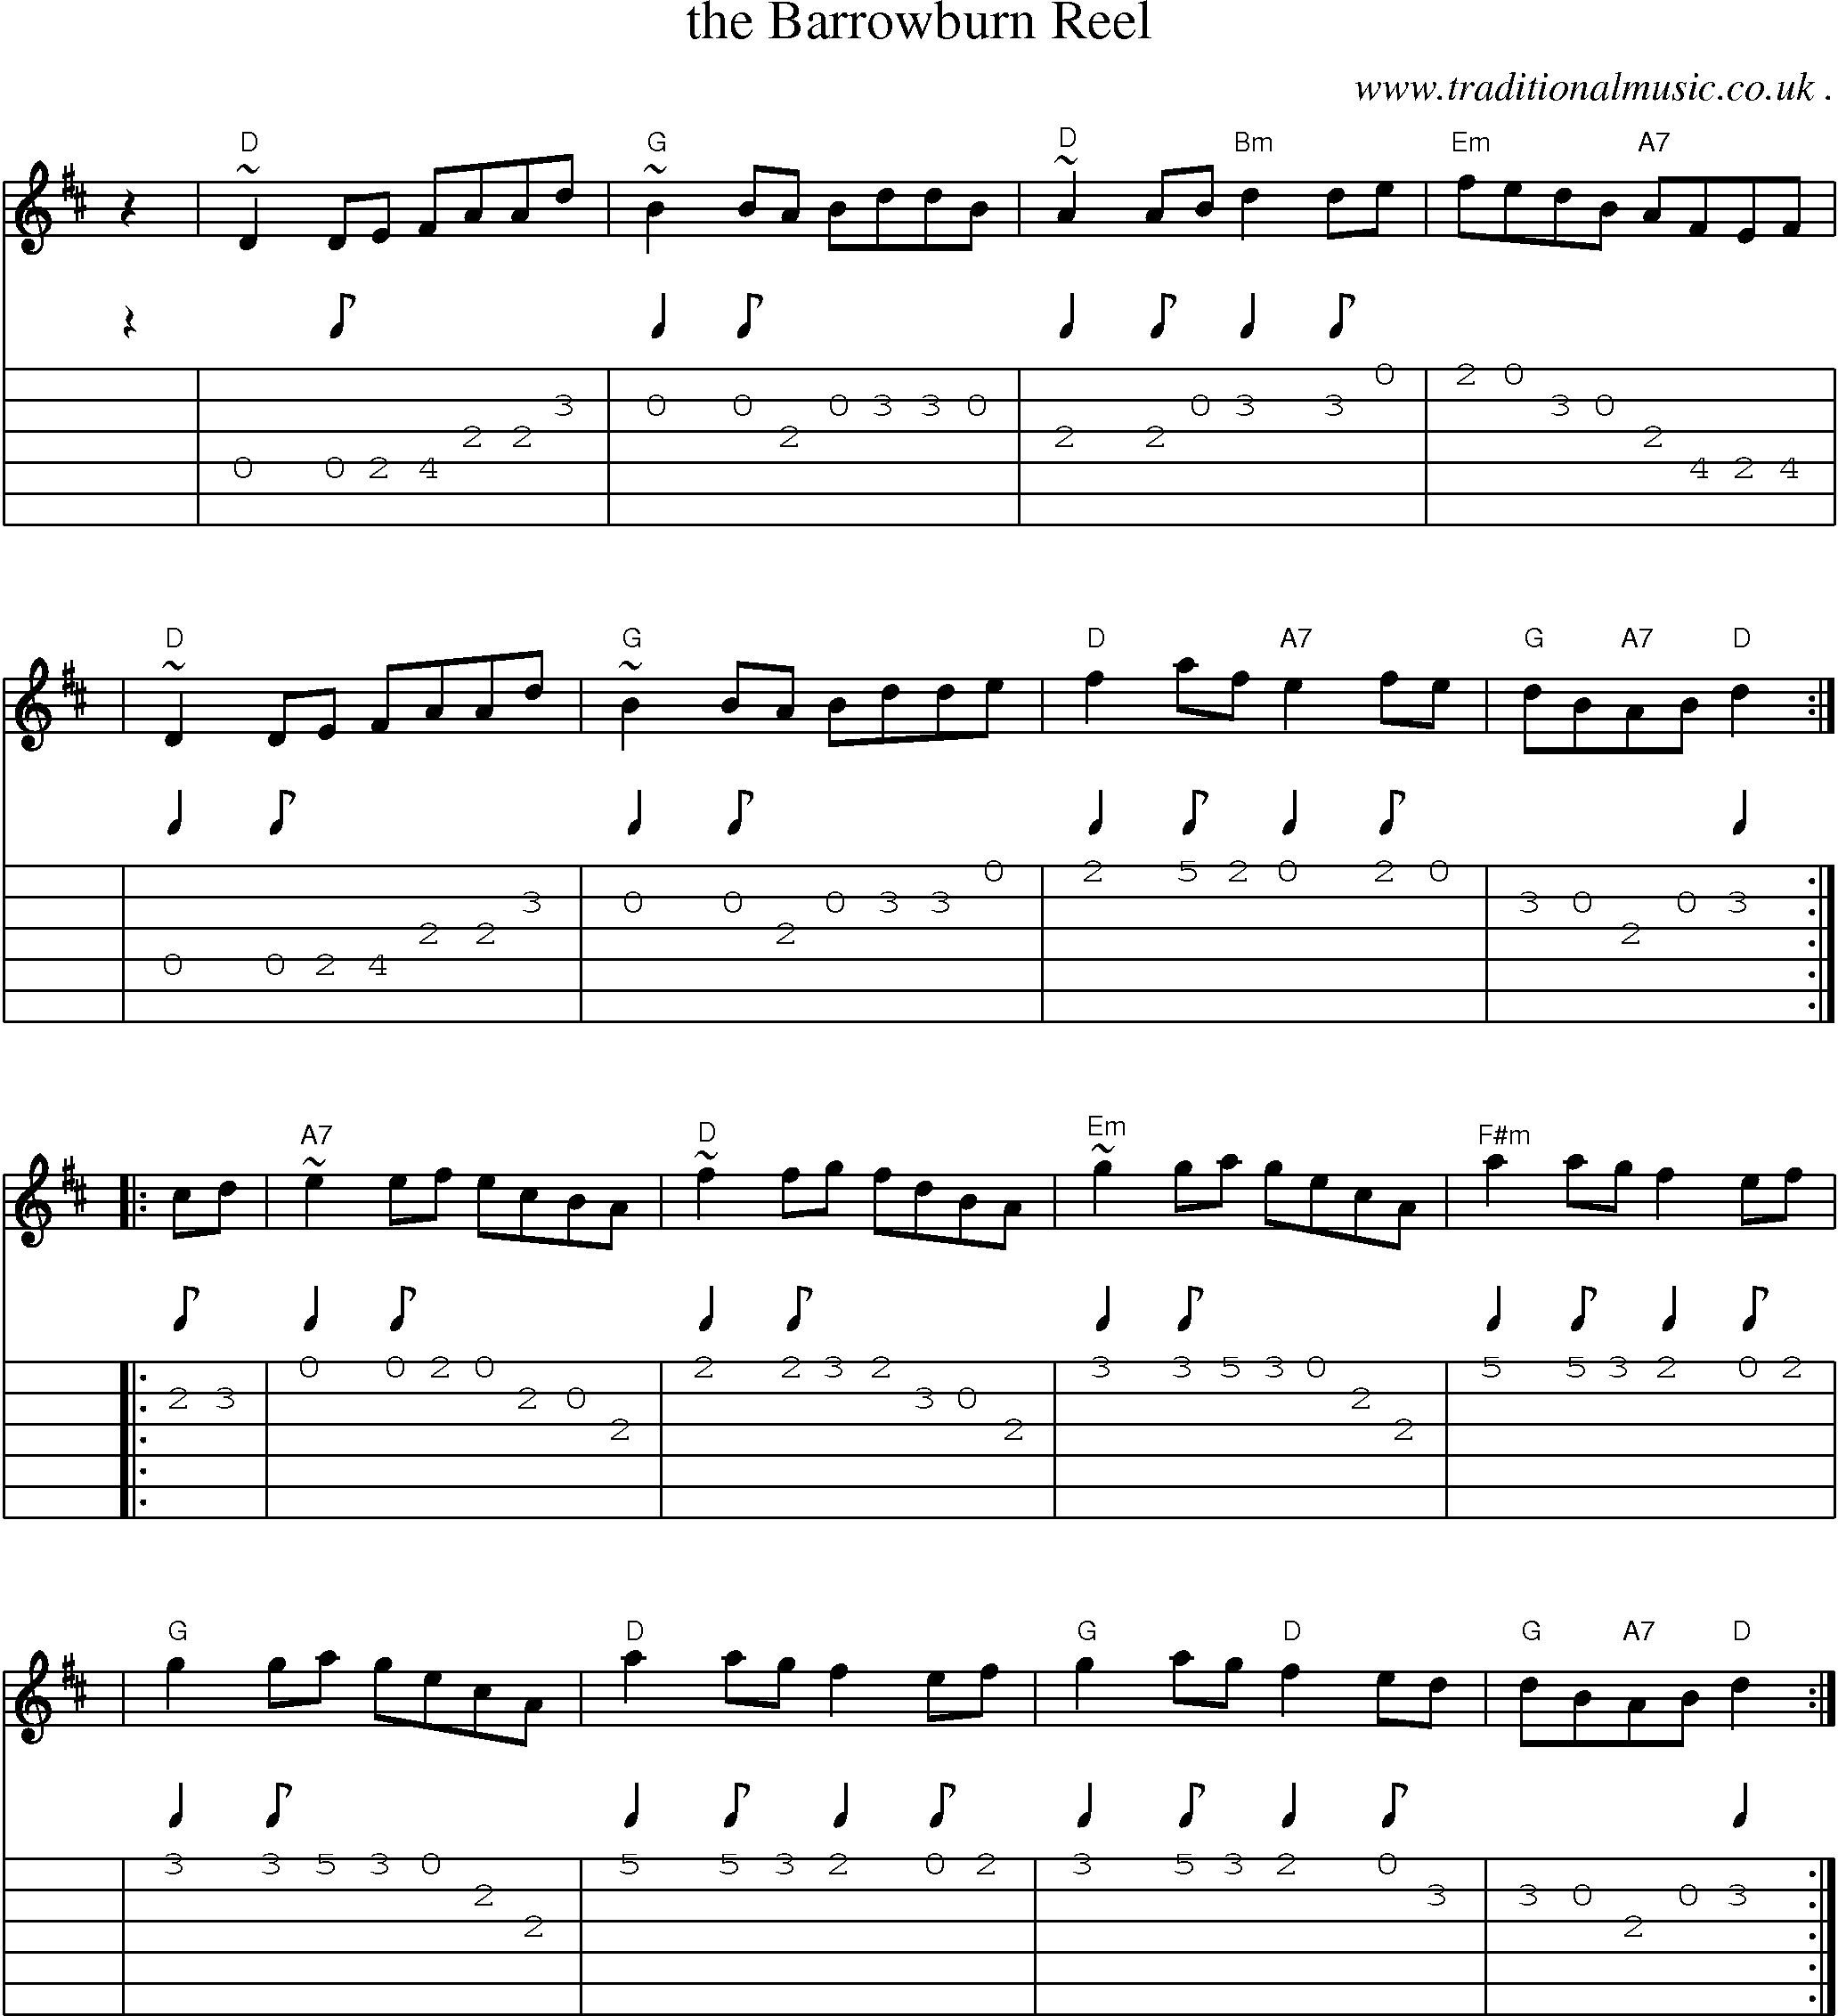 Sheet-music  score, Chords and Guitar Tabs for The Barrowburn Reel